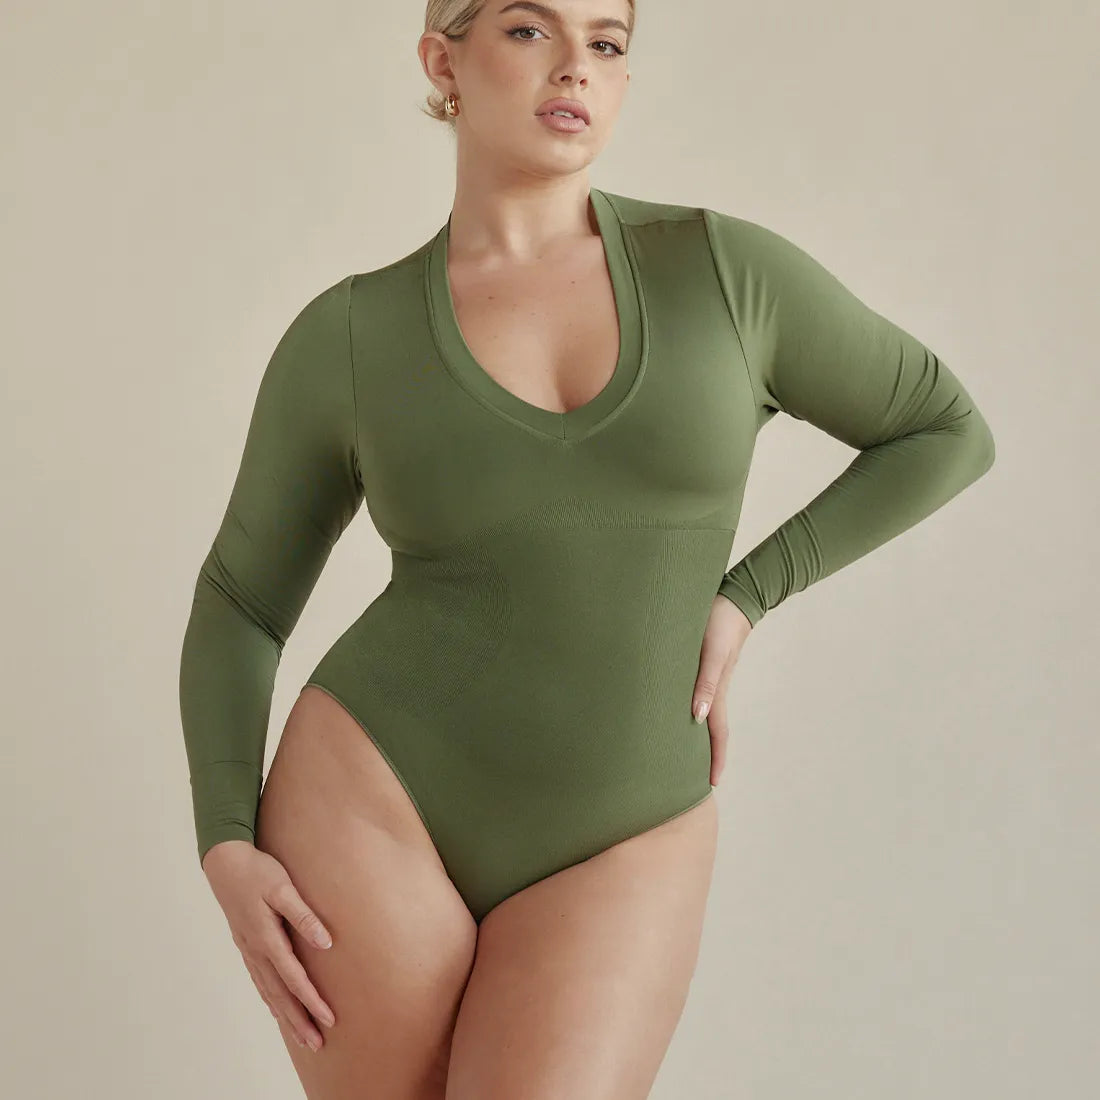 Green Comfortable Seamless Basic BODYSUIT for Every Day Soft